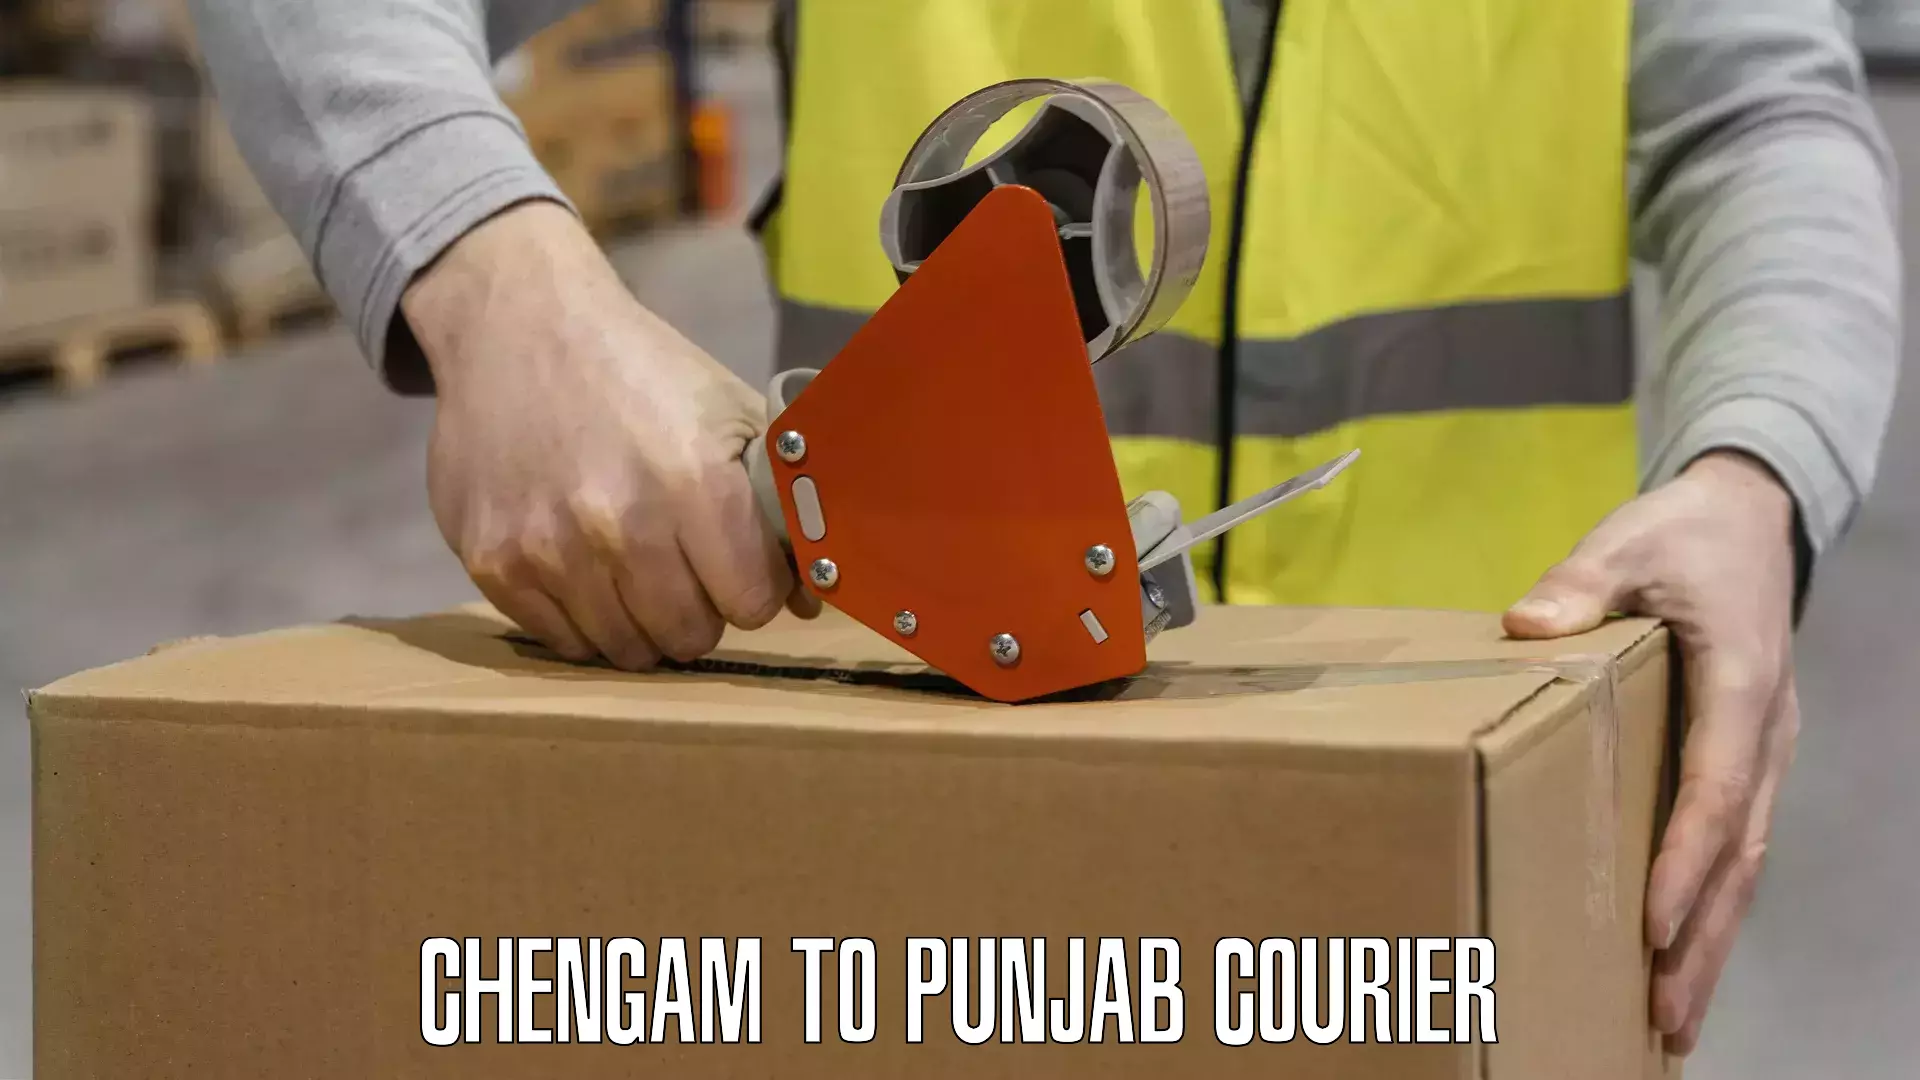 Easy access courier services Chengam to Jalandhar